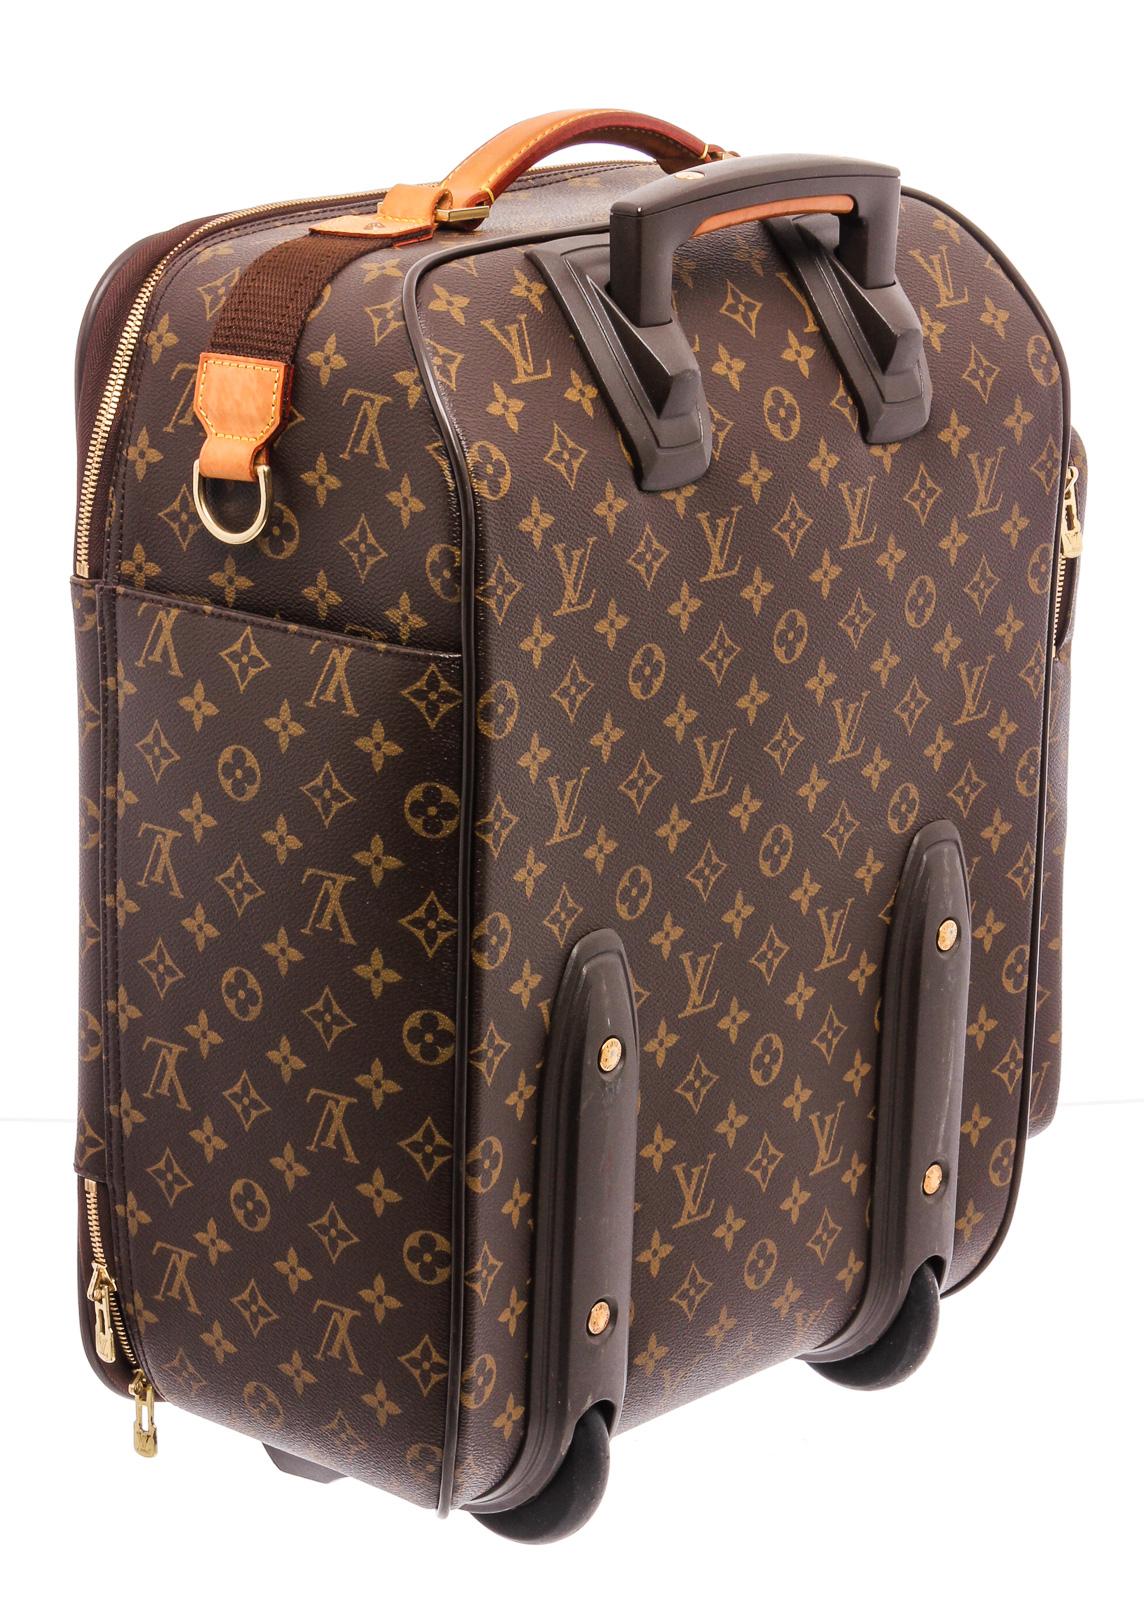 Brown monogram coated canvas Louis Vuitton Bosphore Trolley 45 with brass hardware, tan vachetta leather trim, retractable pull handle at top, flat handle at side, exterior zip pocket at side featuring five holster straps, slit and zip pocket at